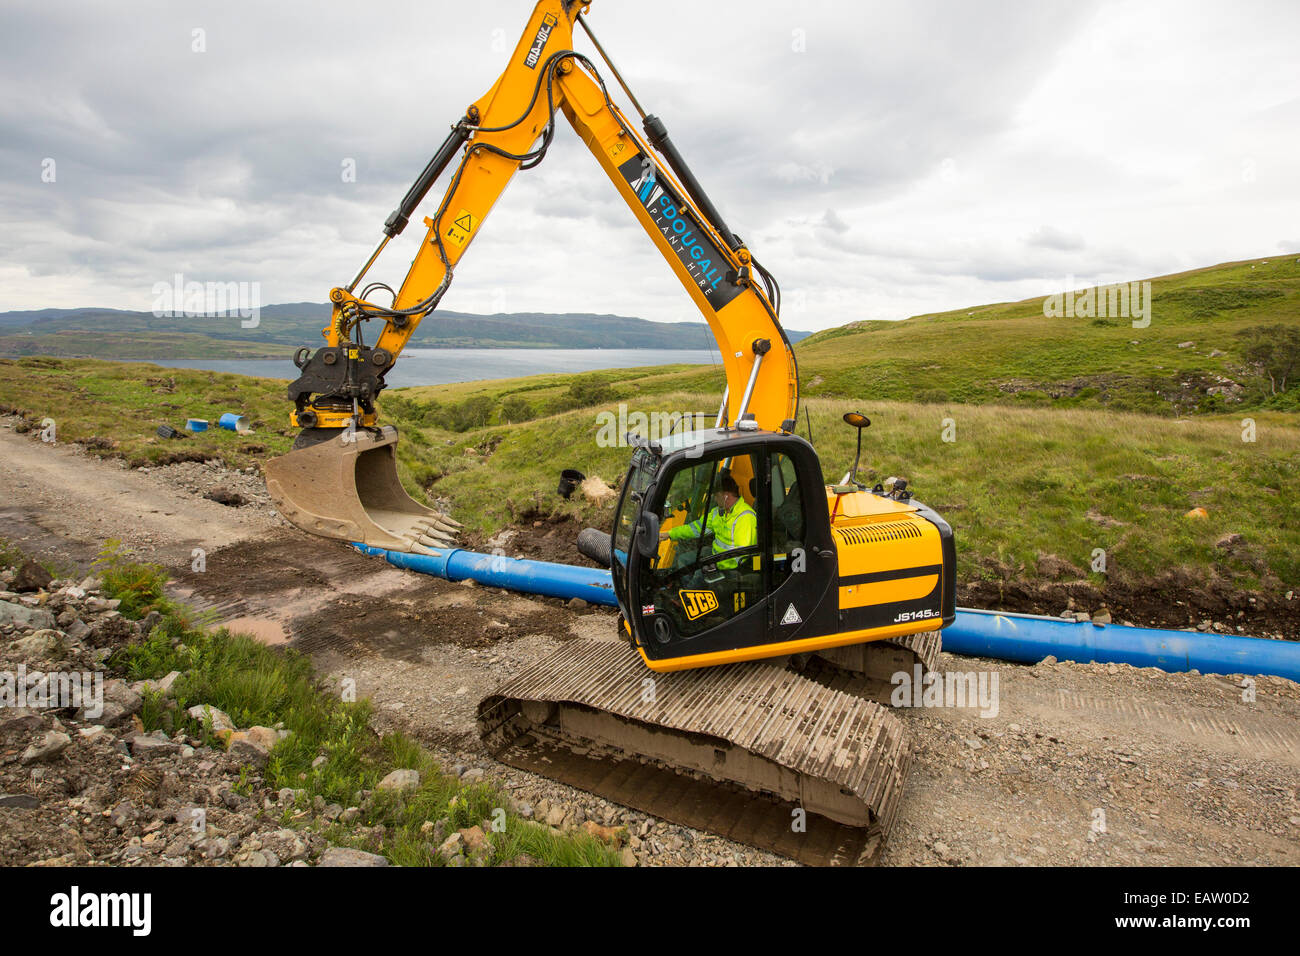 A 700 Kw hydro power plant being constructed on the slopes of Ben more, Isle of Mull, Scotland, UK. Stock Photo